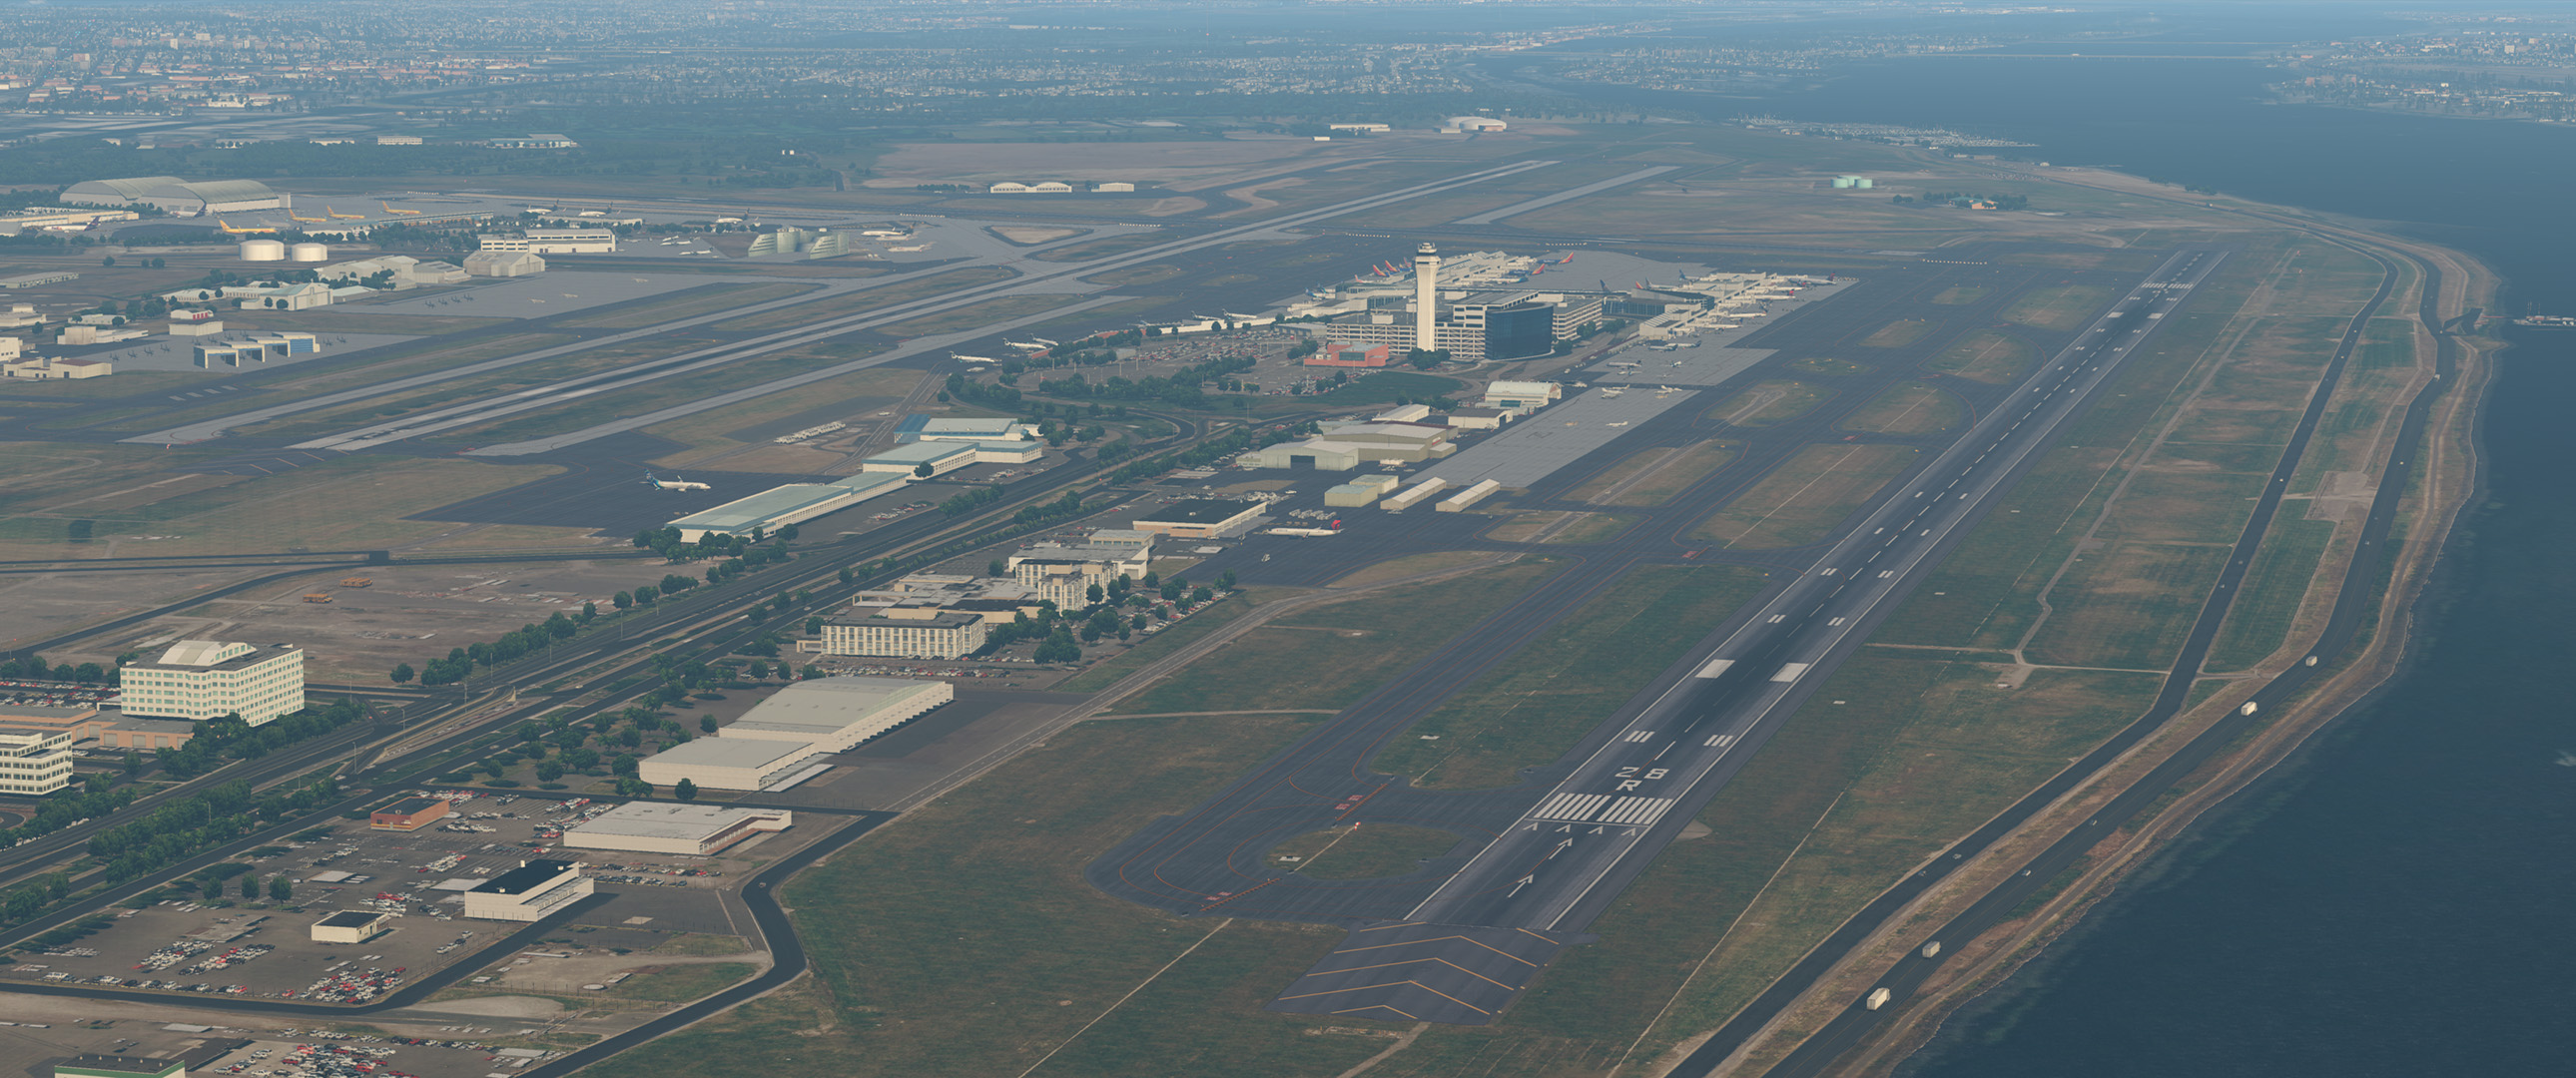 Best Freeware Sceneries for X-Plane 11 image 91